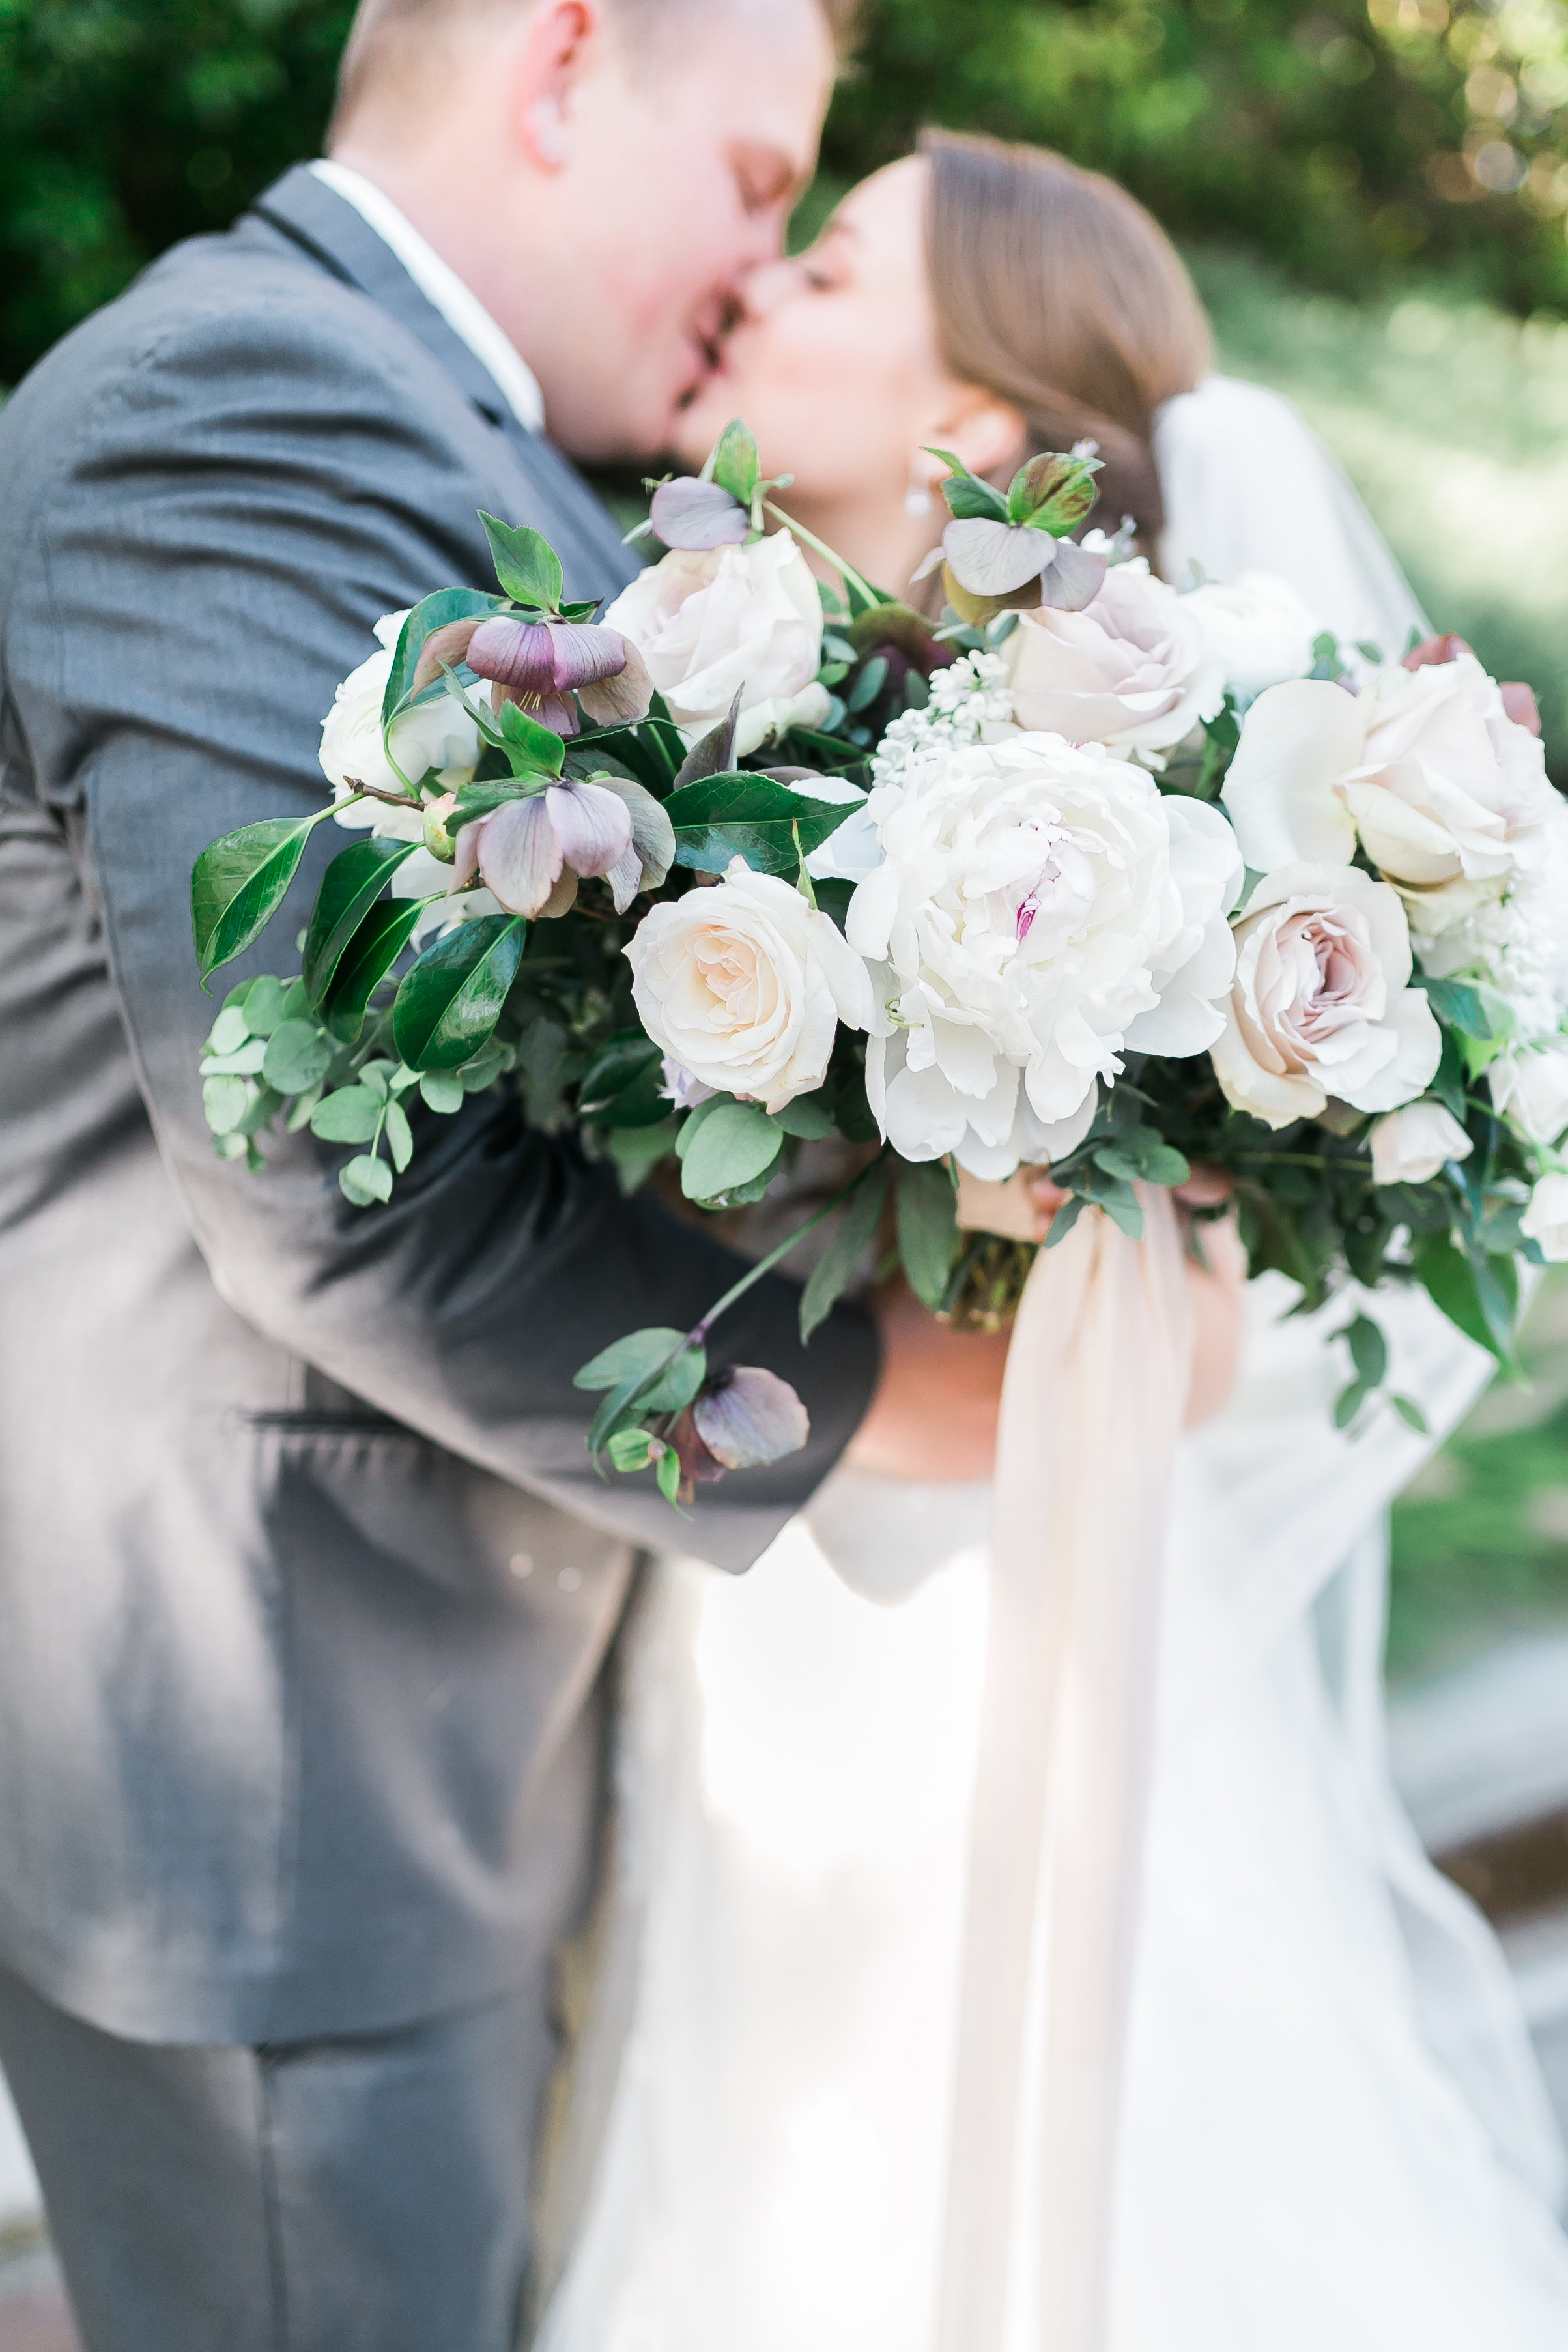 Bridal bouquet of hellebore, peonies, ranunculus and other spring florals. 